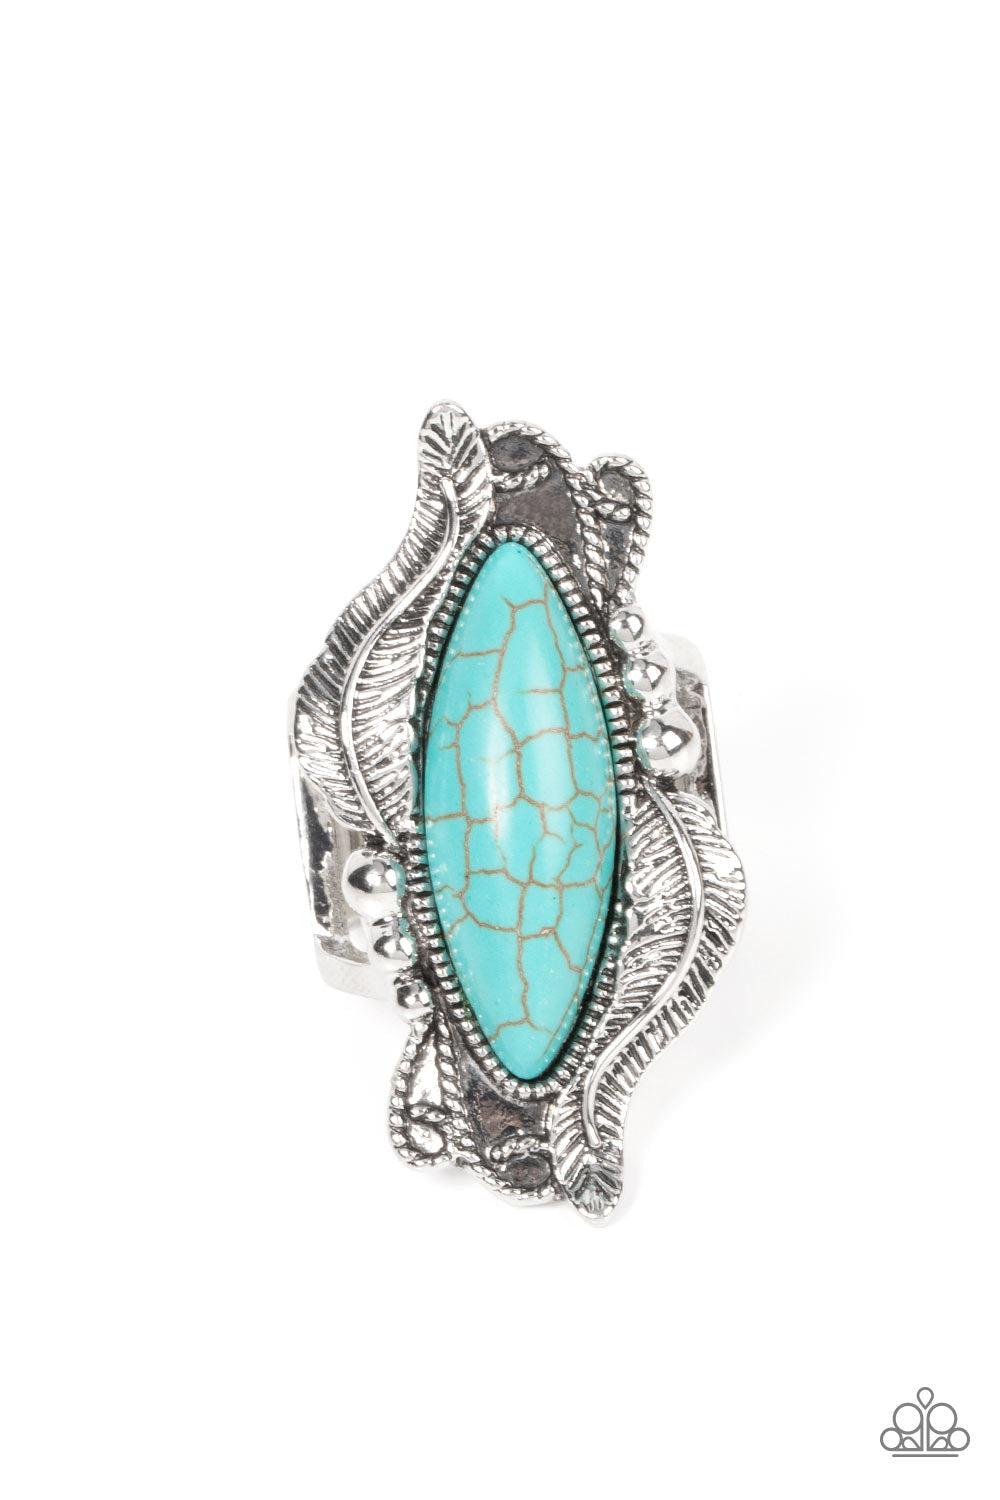 Sahara Serendipity Turquoise Blue Stone Ring - Paparazzi Accessories- lightbox - CarasShop.com - $5 Jewelry by Cara Jewels